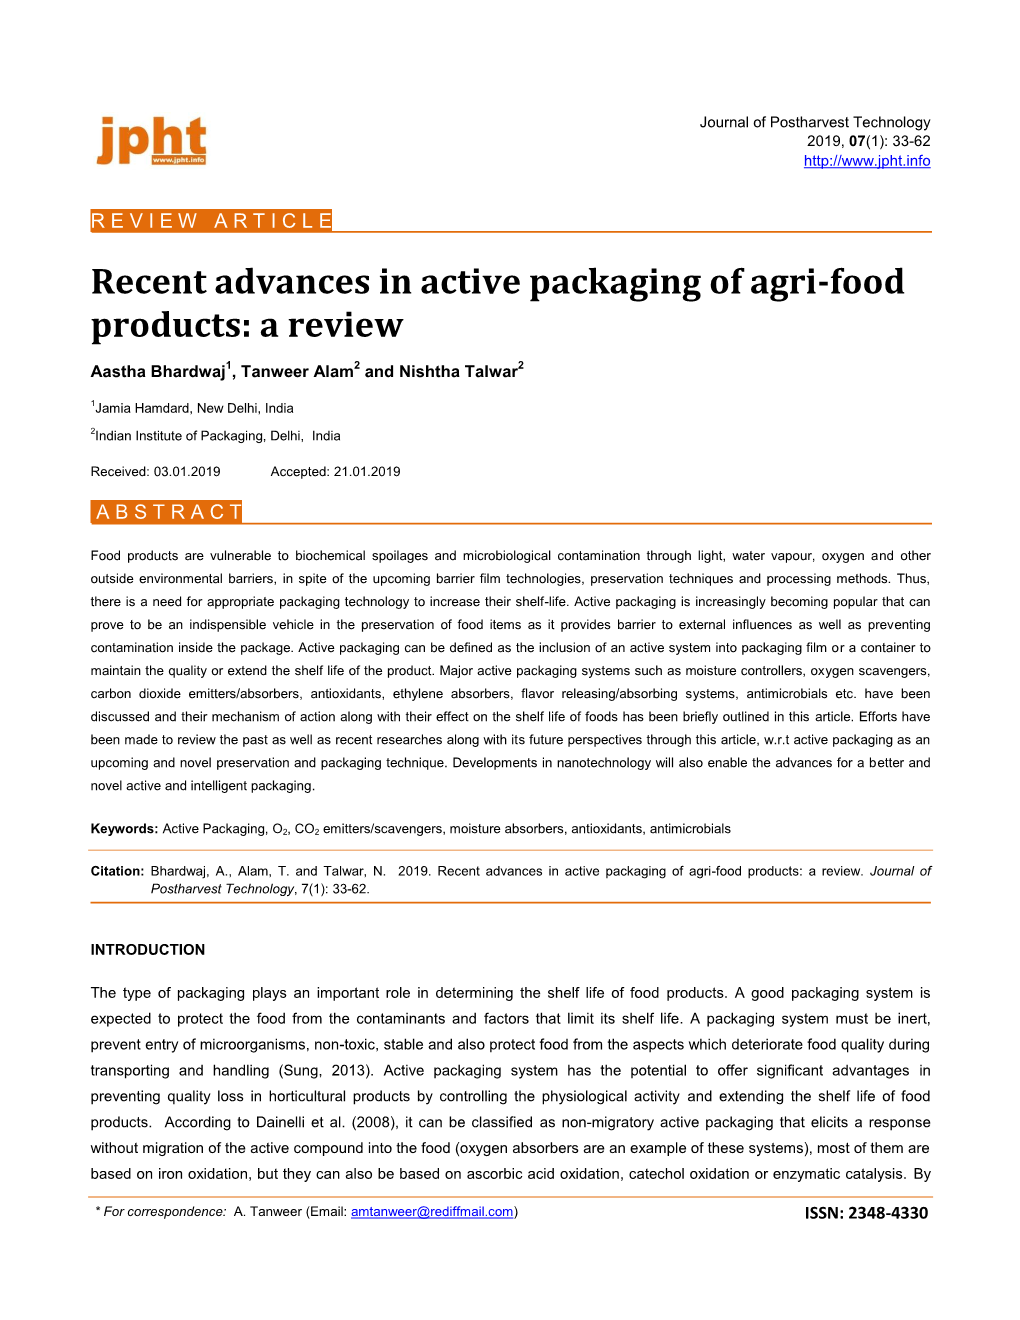 Recent Advances in Active Packaging of Agri-Food Products: a Review